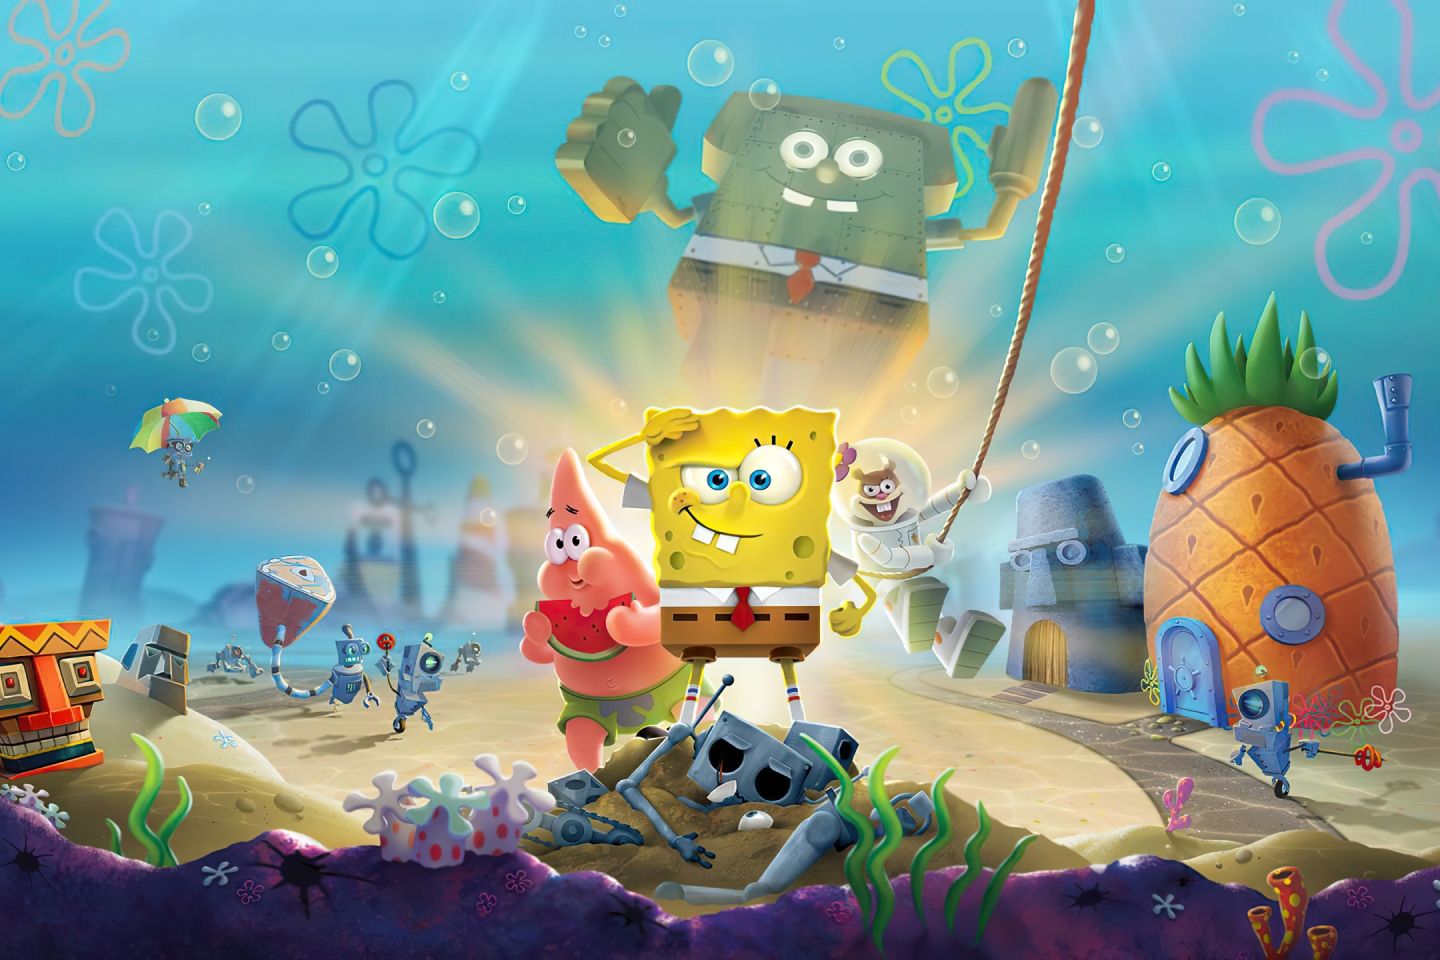 With millions of underwater species yet to be discovered, can Spongebob Squarepants be for real?